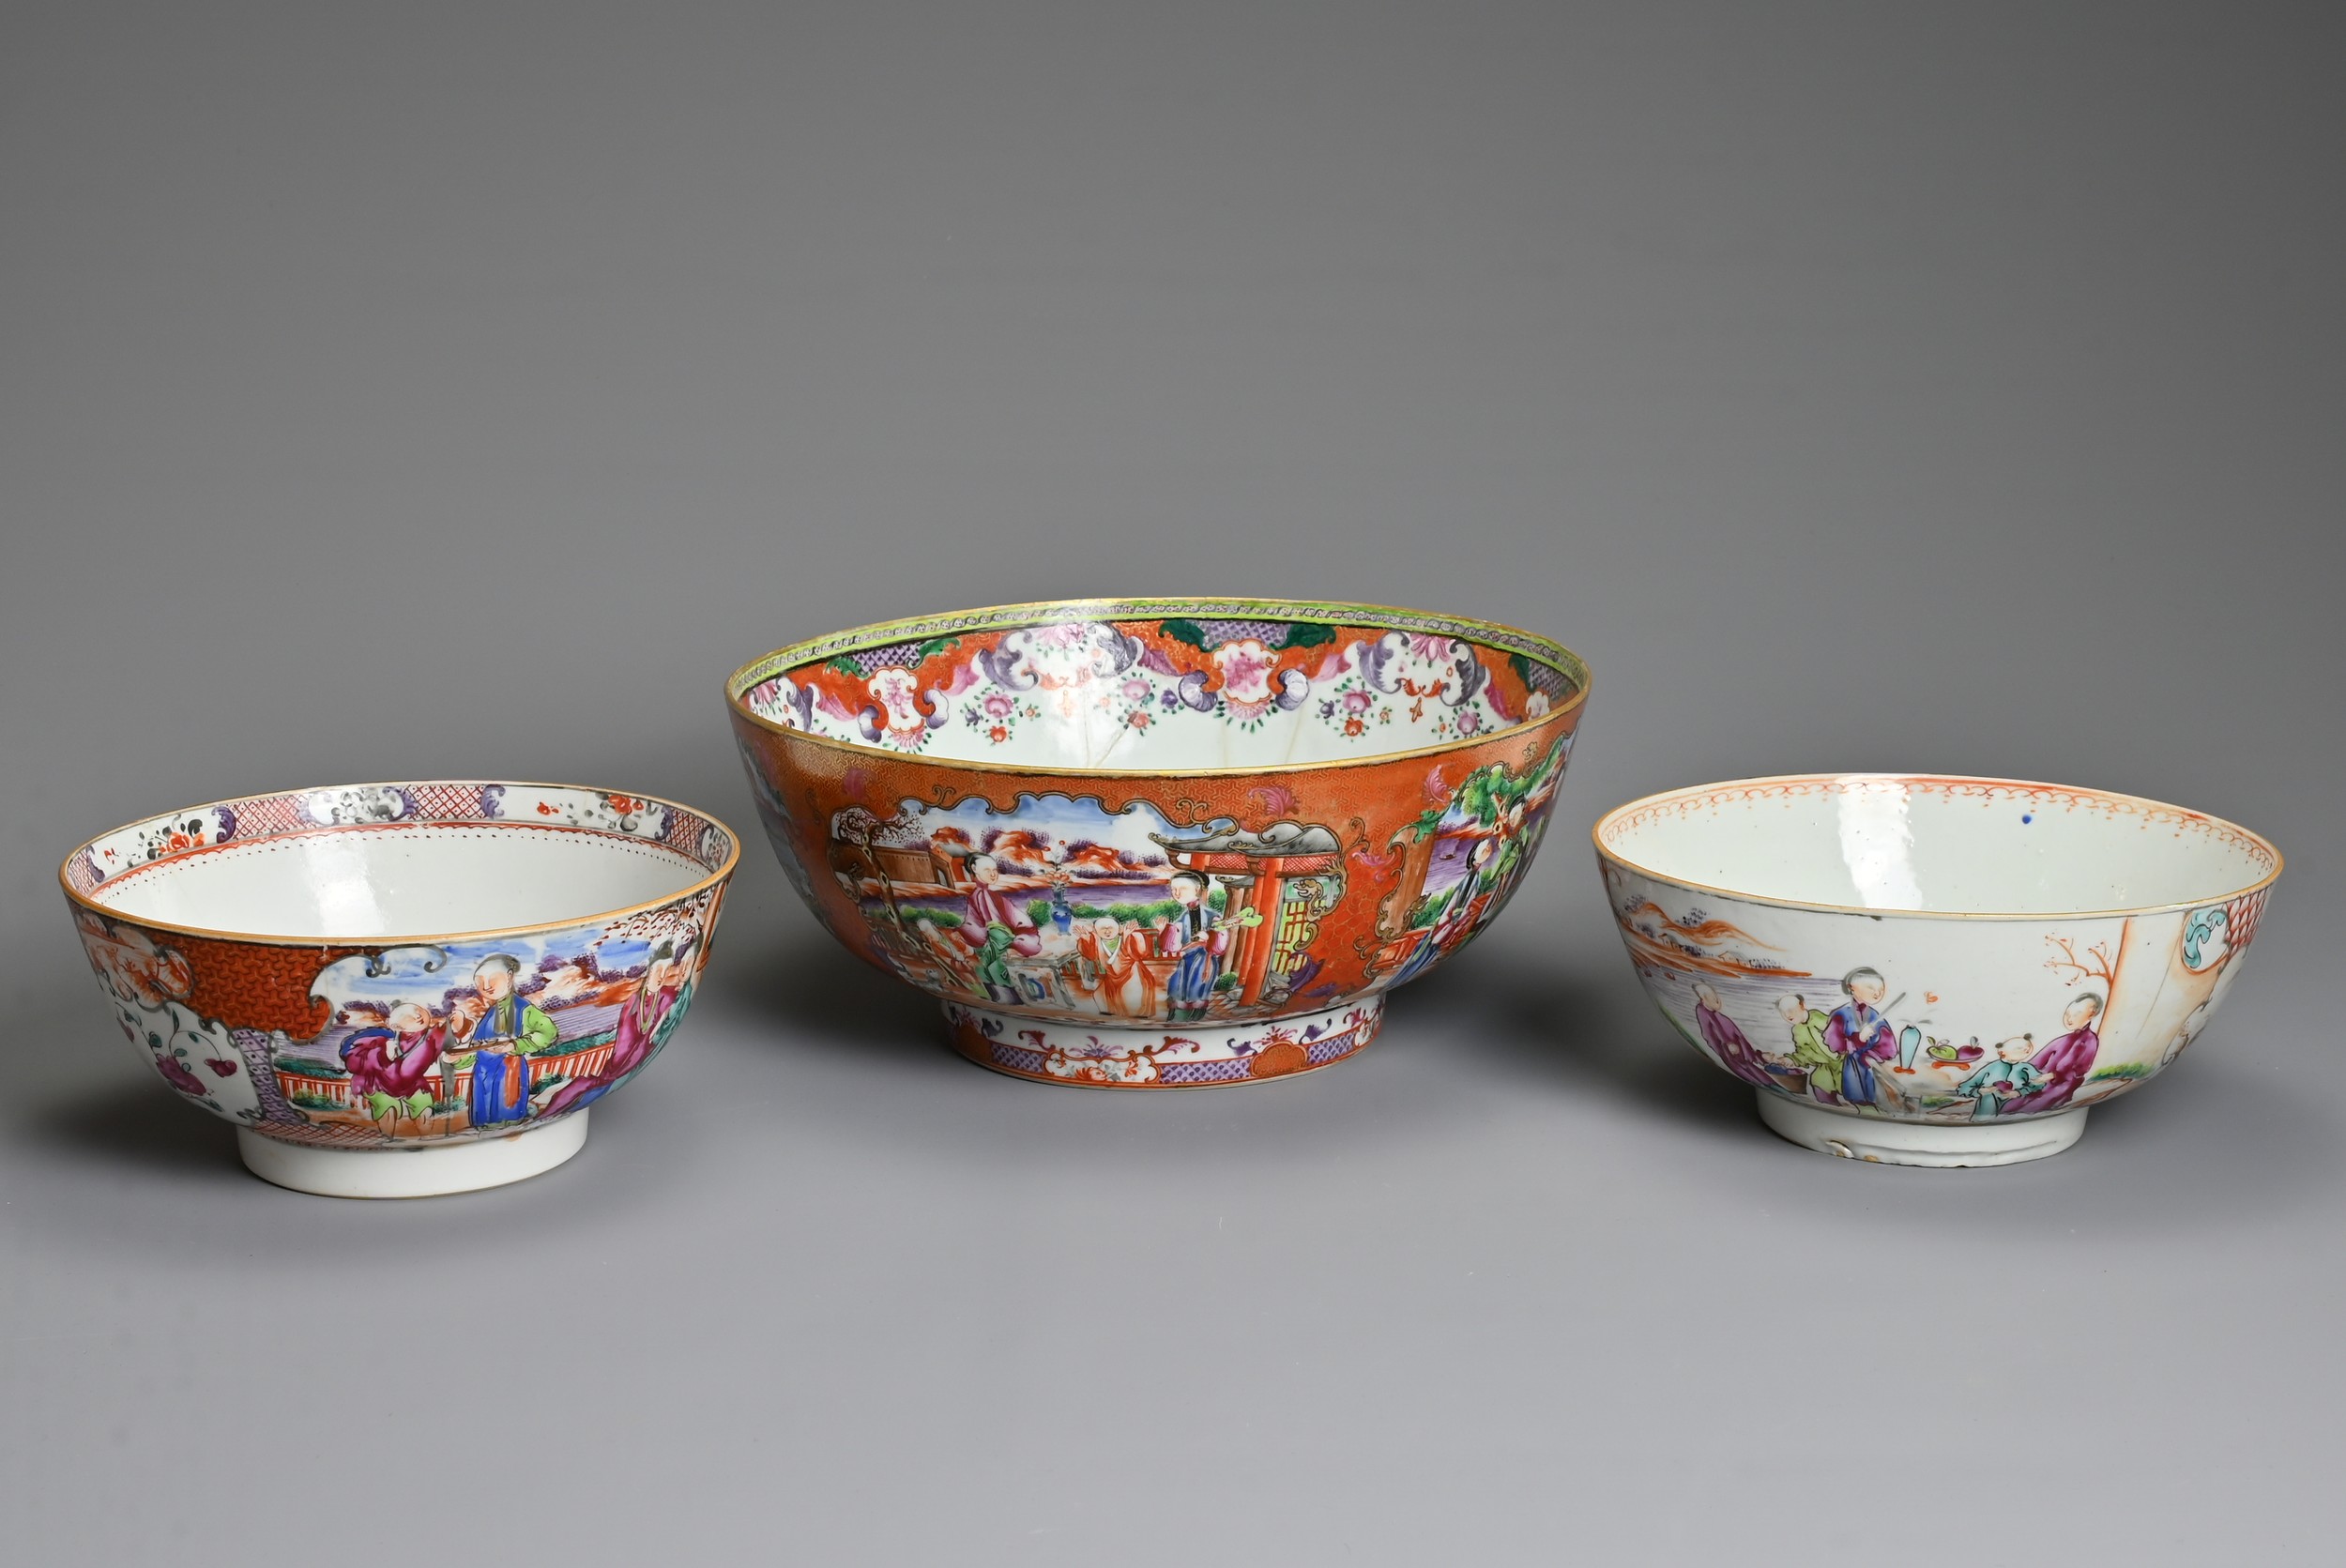 THREE CHINESE FAMILLE ROSE PORCELAIN BOWLS, 18TH CENTURY. Of graduating sizes decorated with various